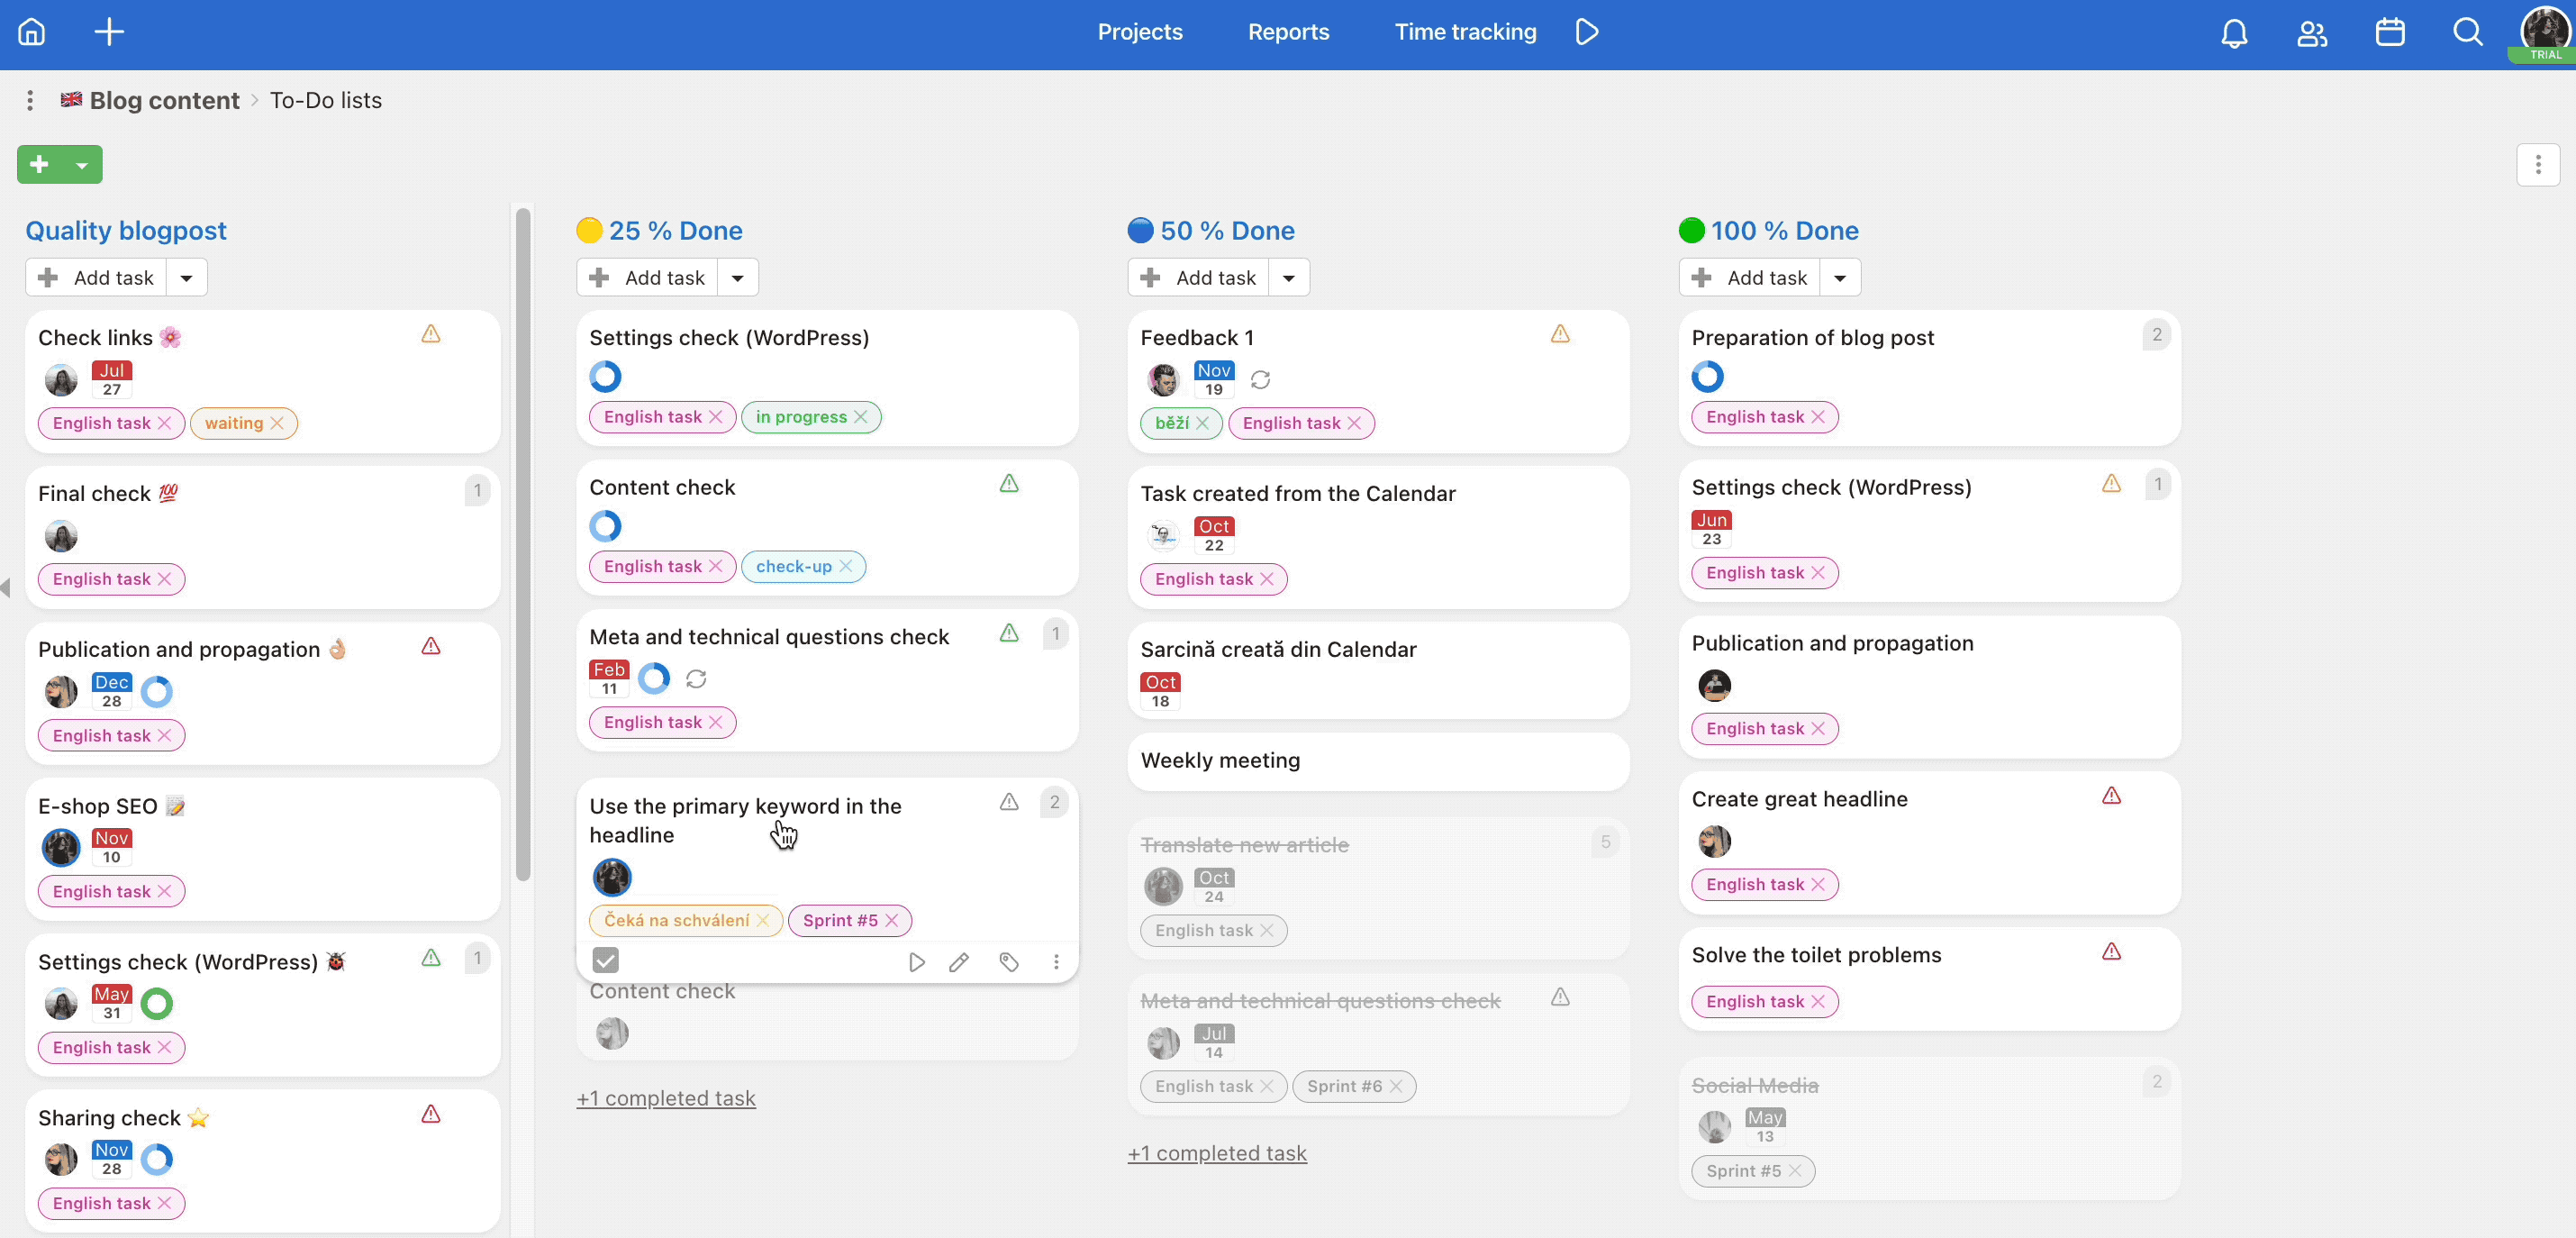 Animation how to move tasks from one To-Do list to another.